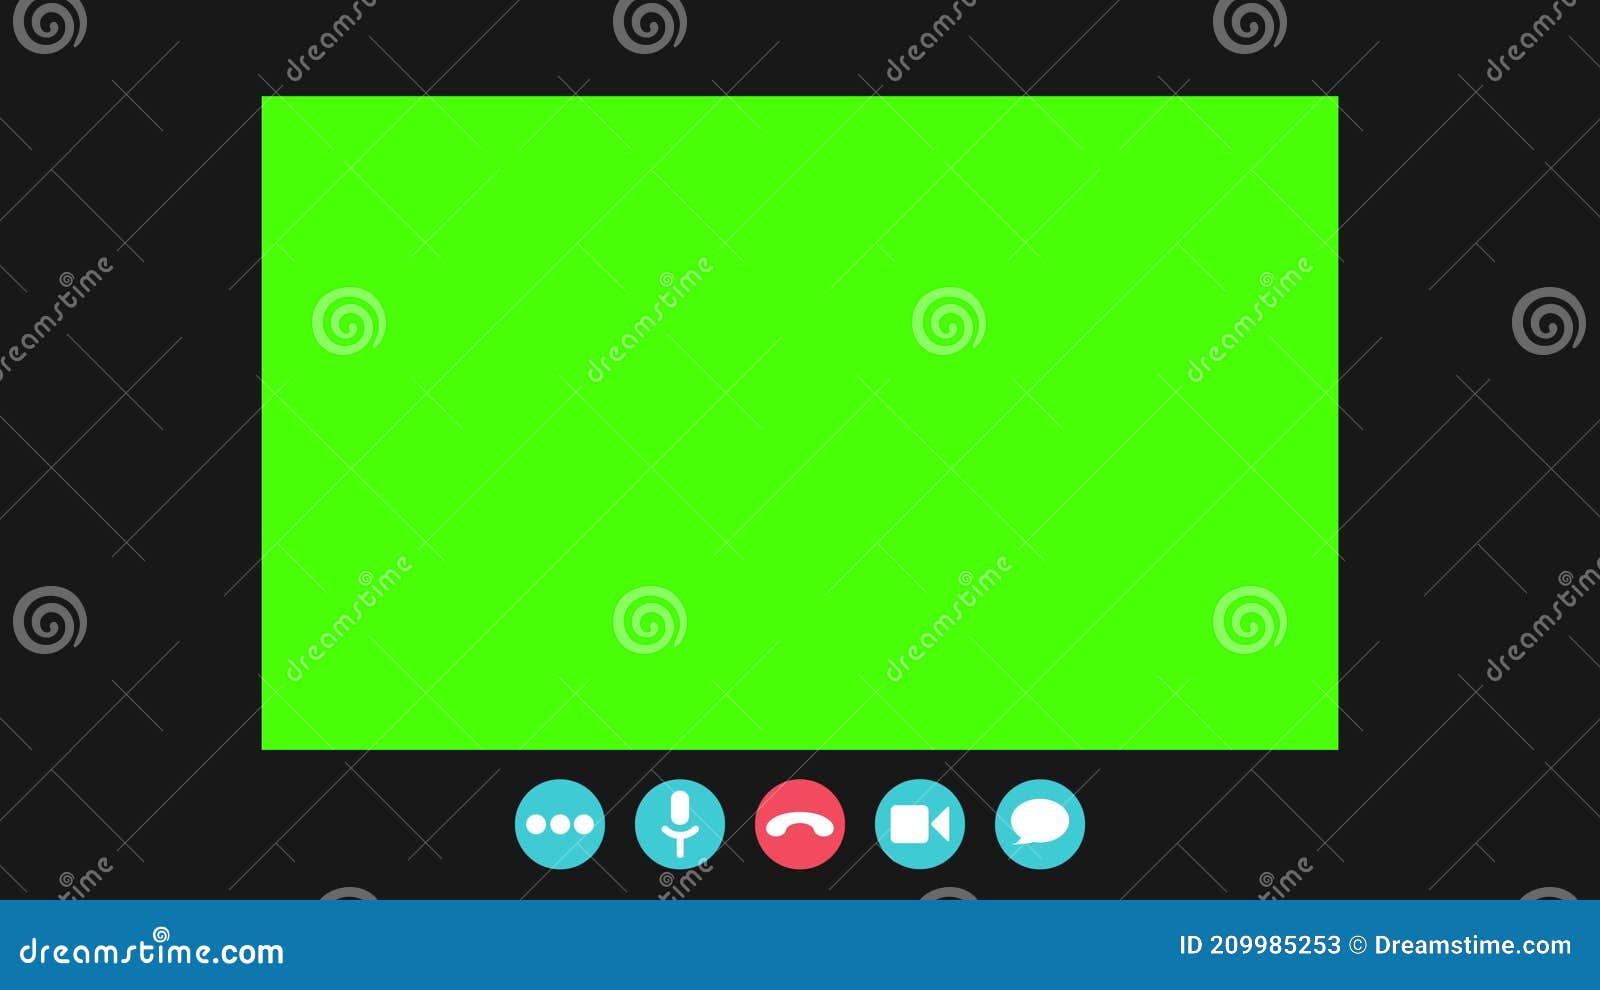 Video Call Meeting Conference Template Interface Animation Green Screen  Stock Video - Video of call, frame: 209985253